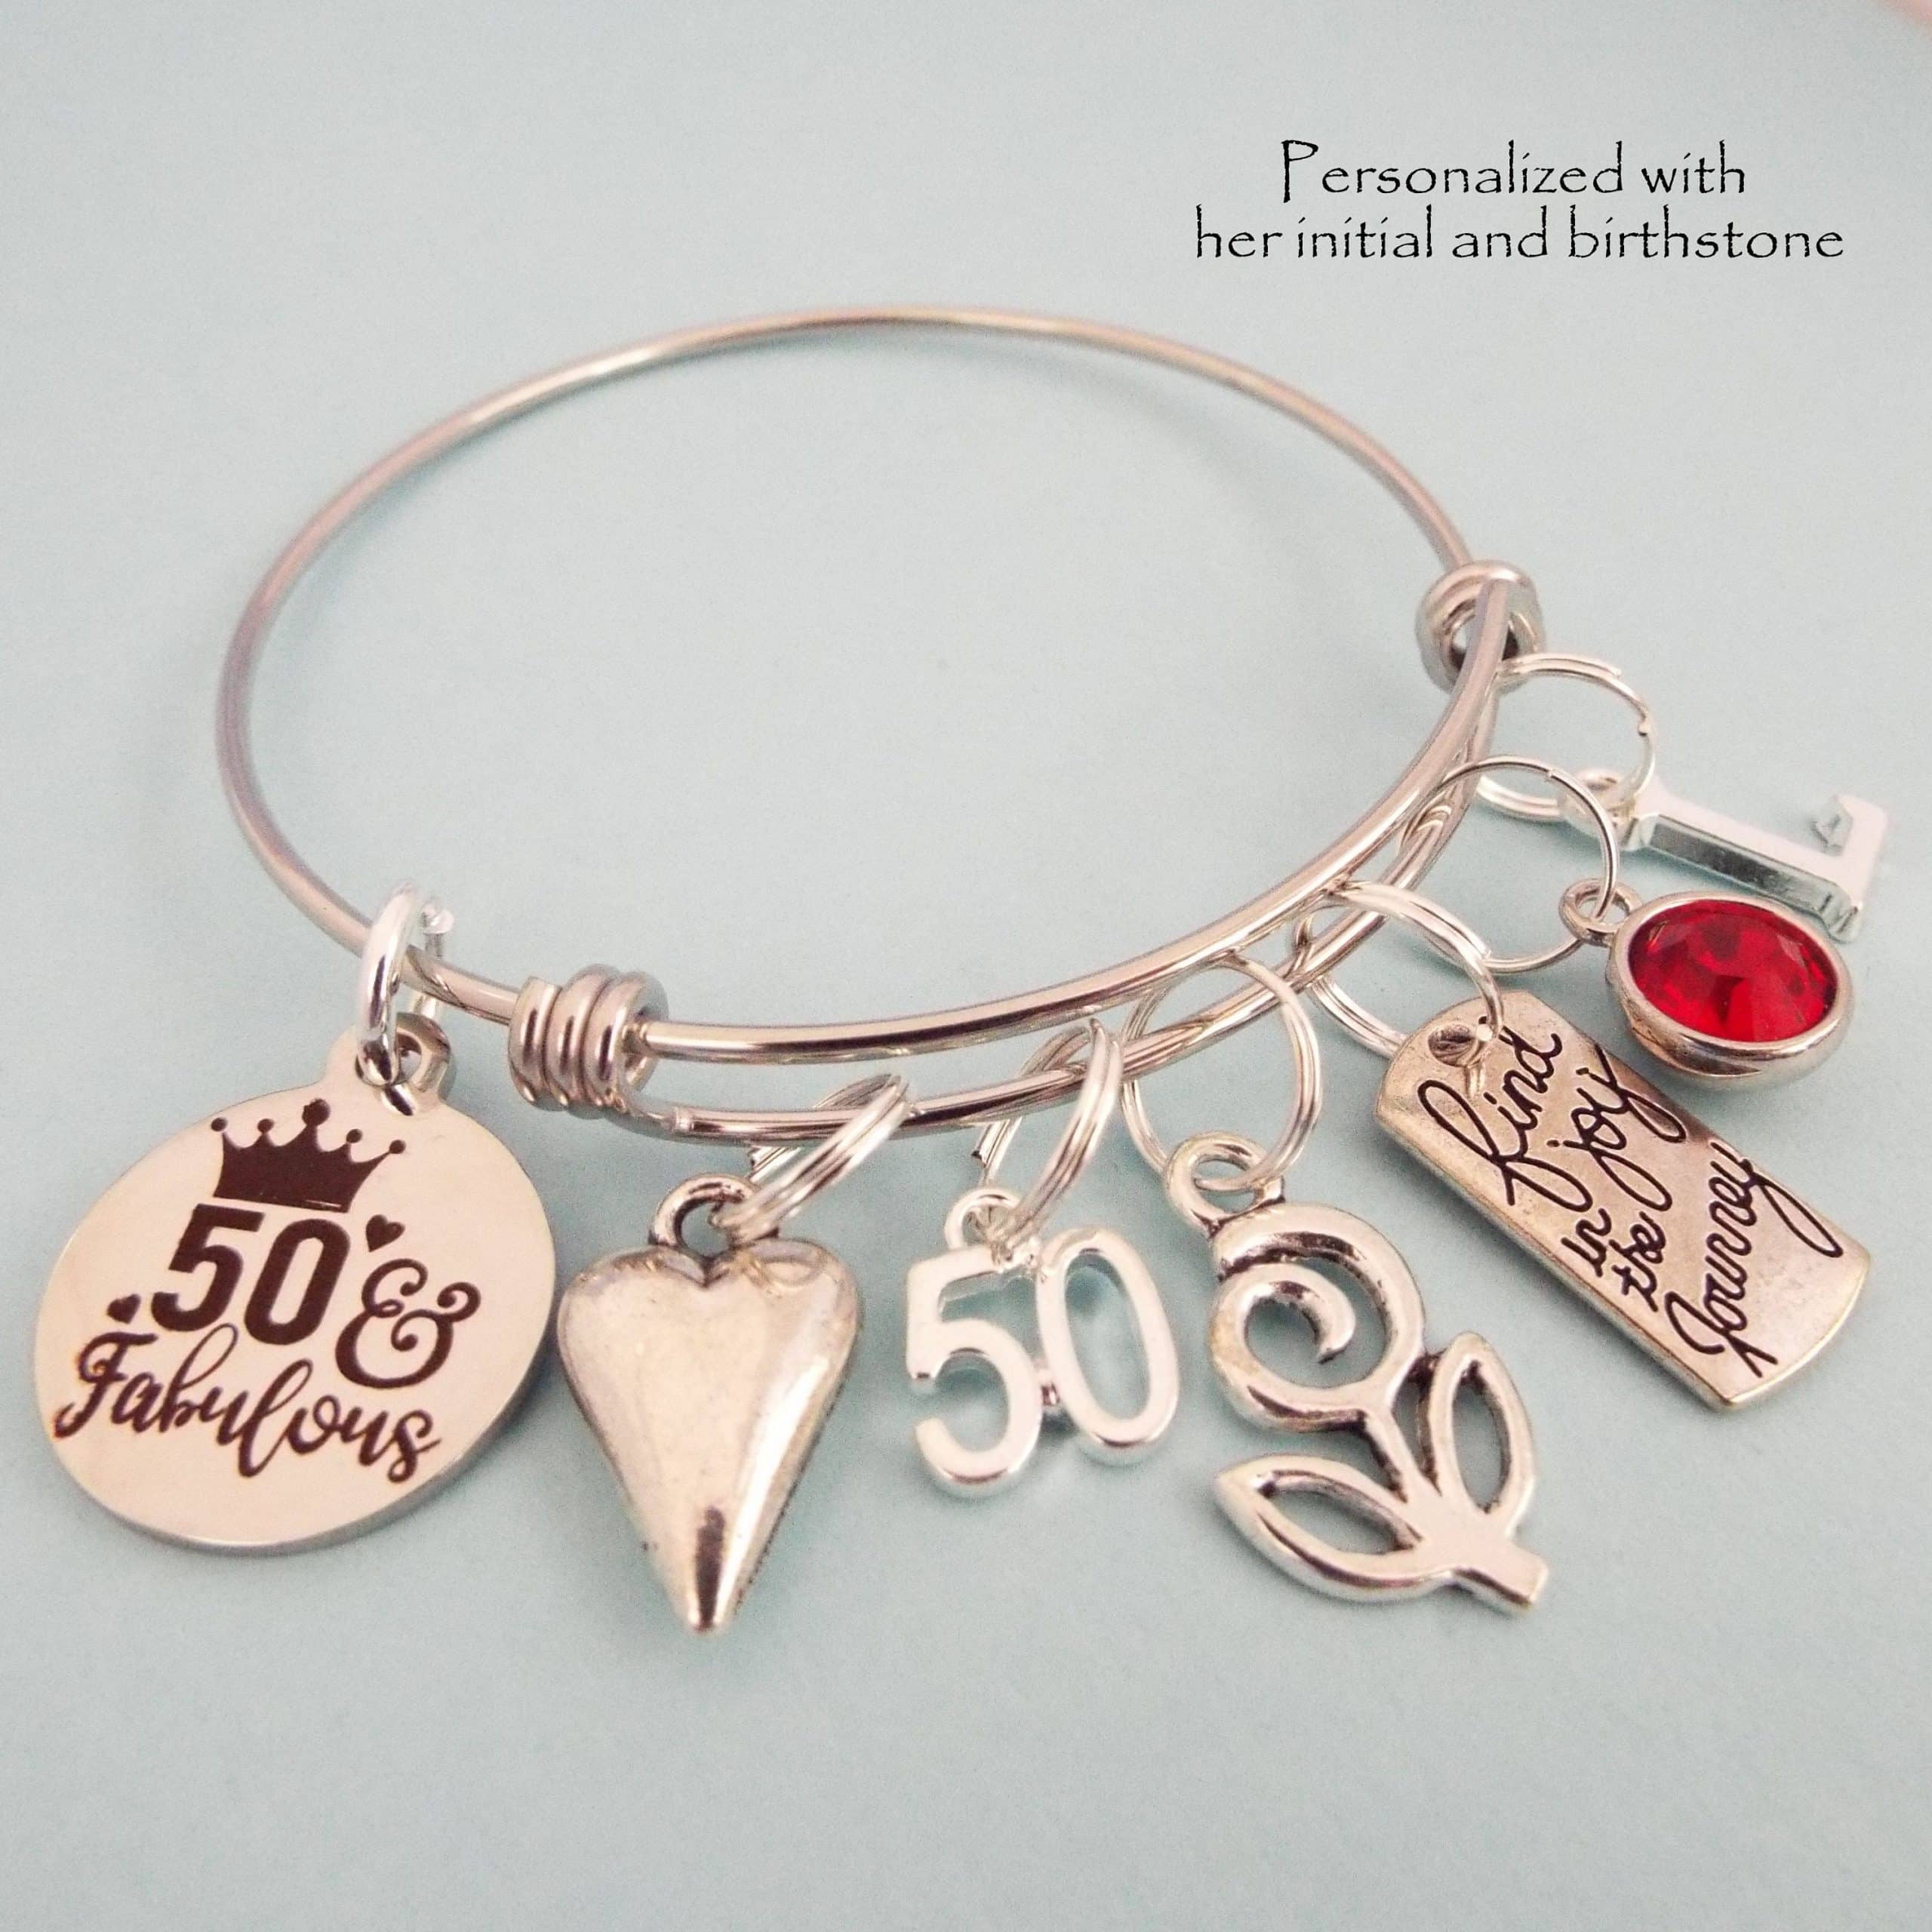 50th Birthday Gift, Personalized Gift for Woman Turning 50, Birthstone ...